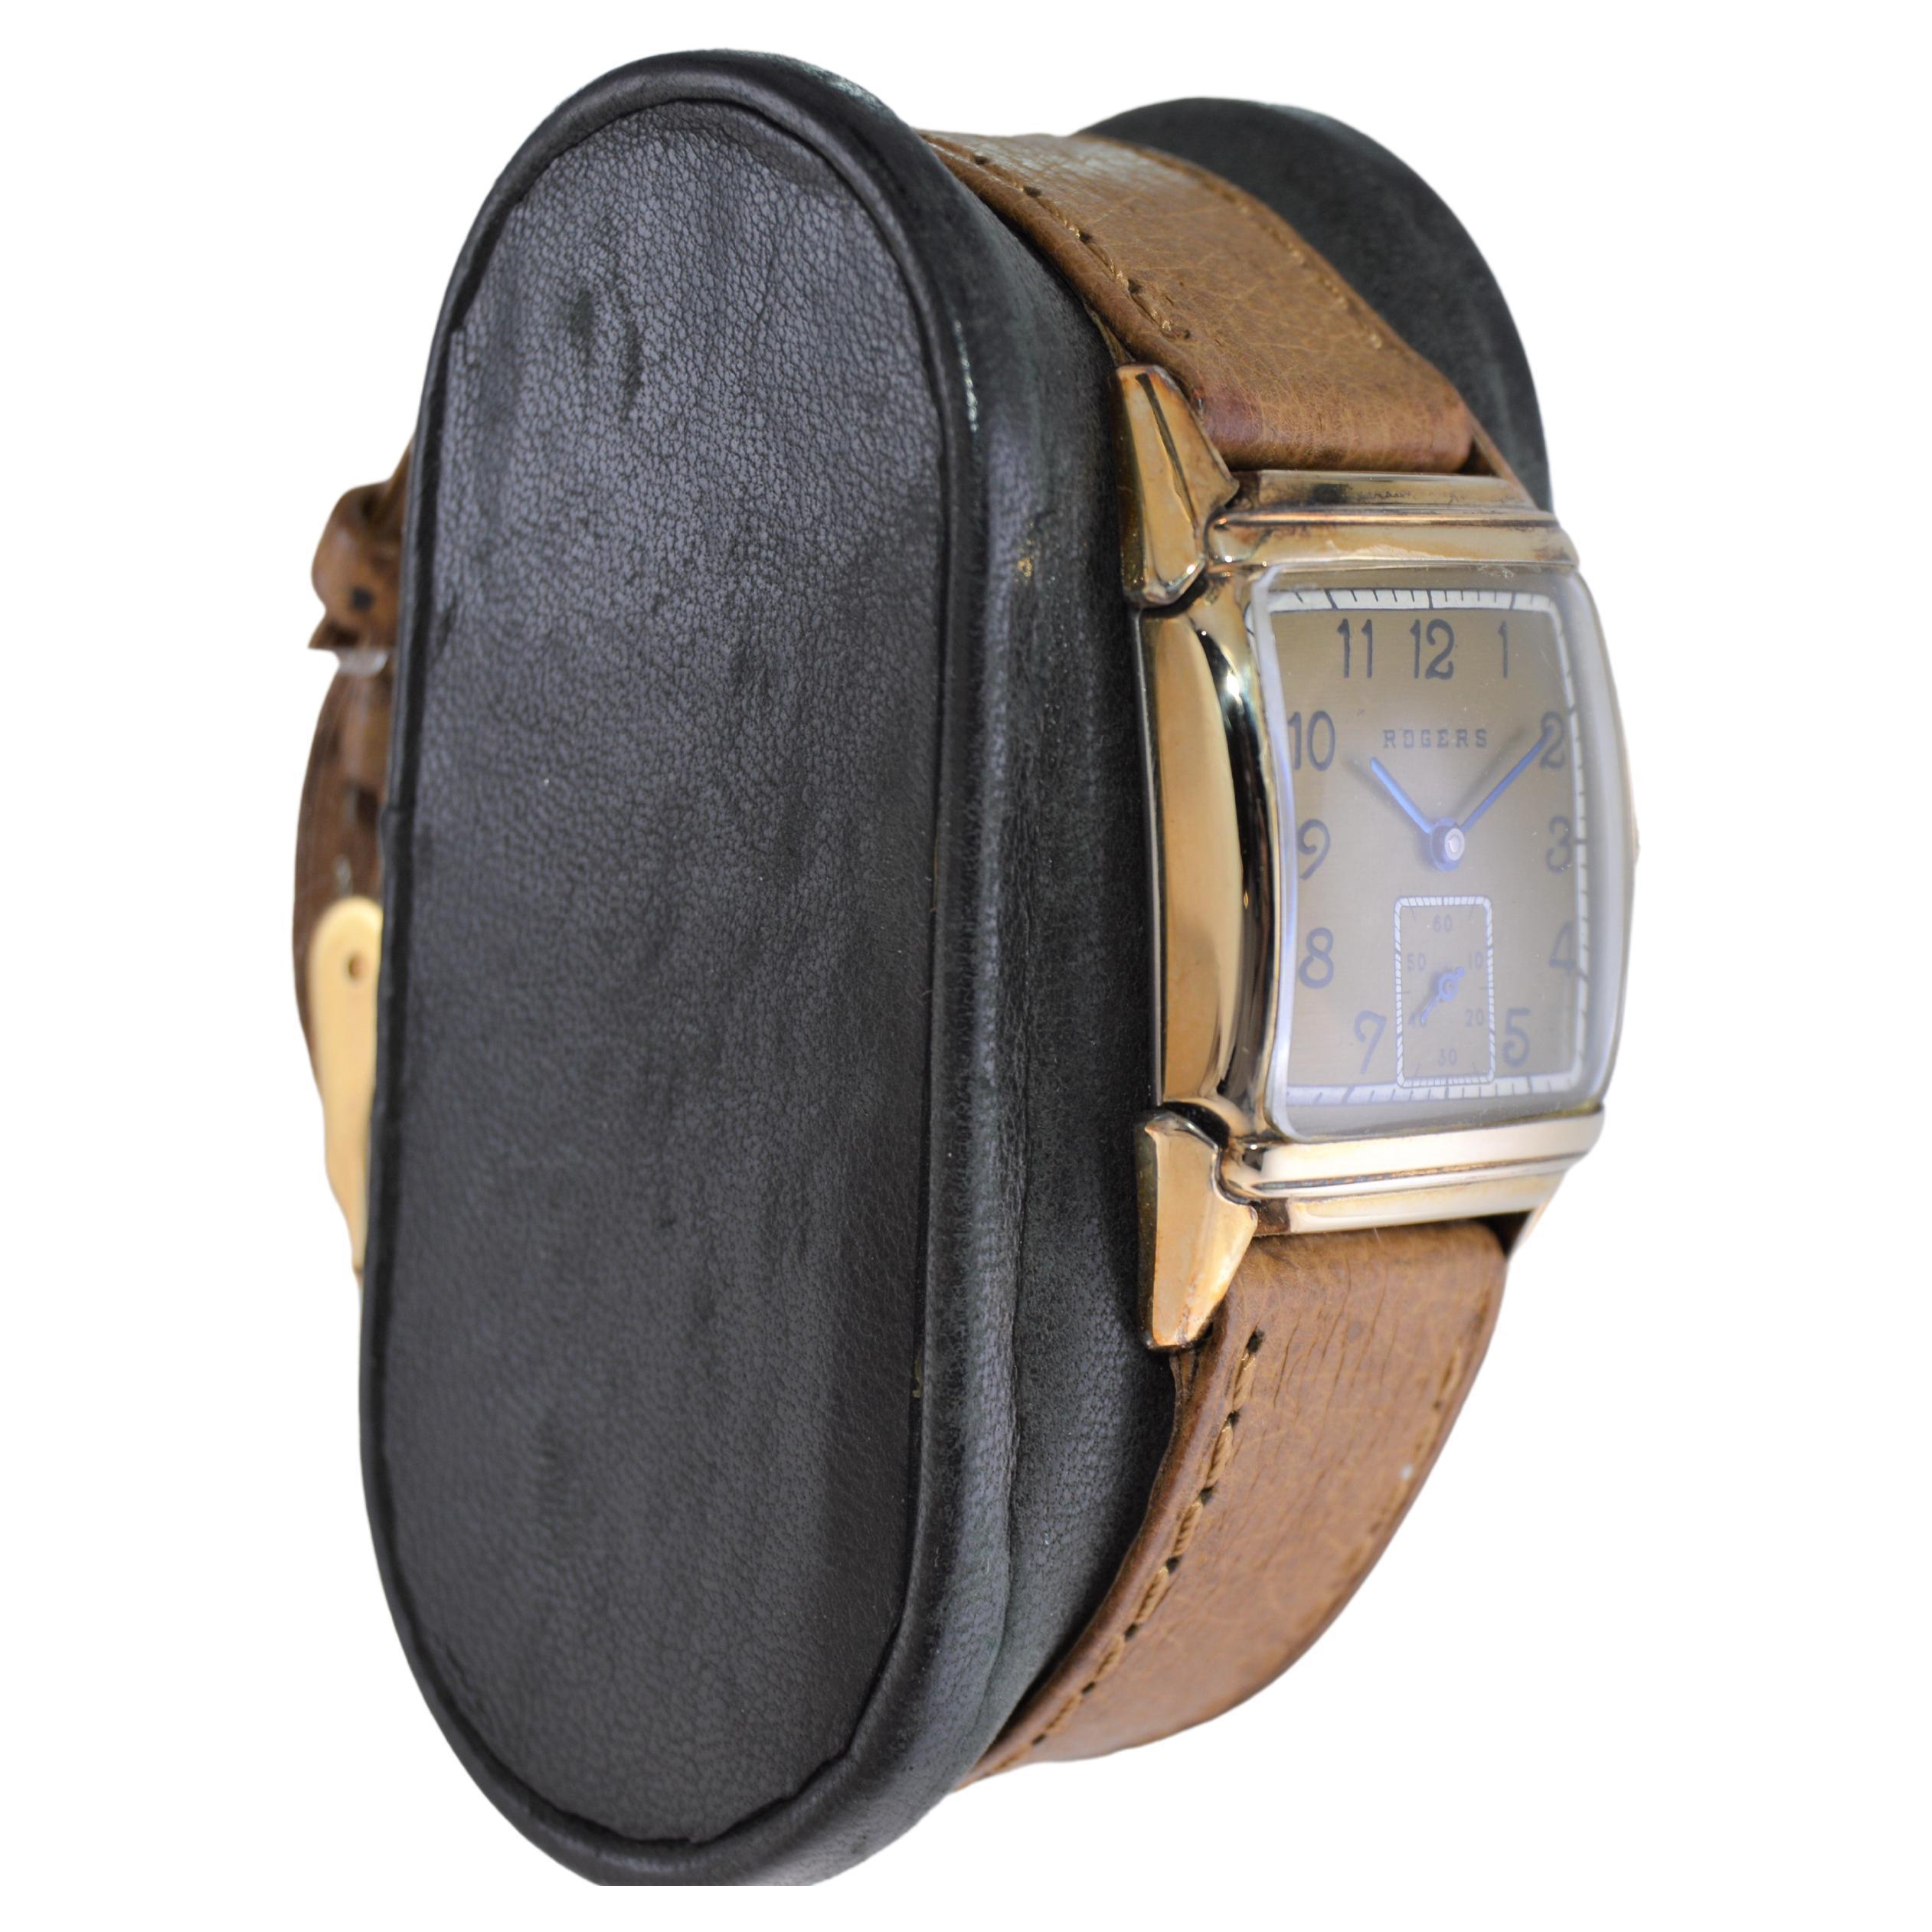 FACTORY / HOUSE: A. Shield / Rogers Watch Company
STYLE / REFERENCE: Art Deco
METAL / MATERIAL: Yellow Gold Filled
CIRCA / YEAR: 1940's
DIMENSIONS / SIZE: Length 35mm X Width 22mm
MOVEMENT / CALIBER: Manual Winding / 17 Jewels 
DIAL / HANDS: